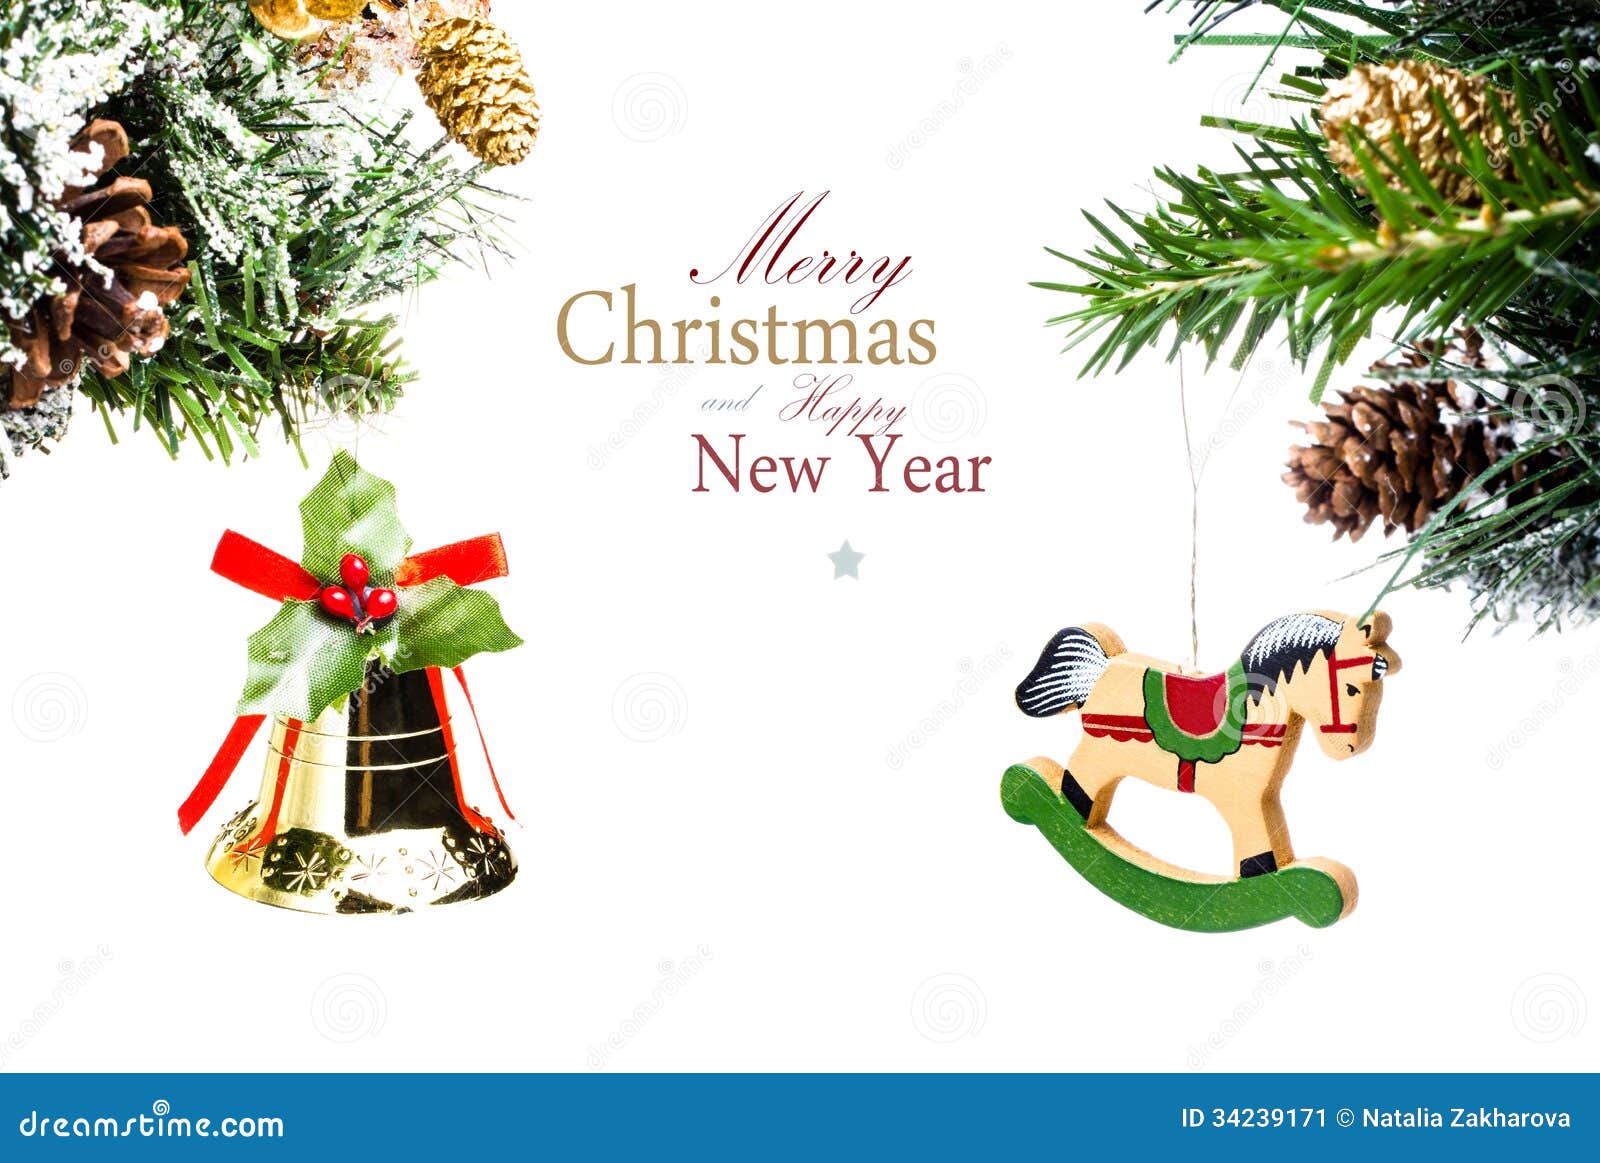 Christmas Card With Golden Bell And Wooden Horse With 